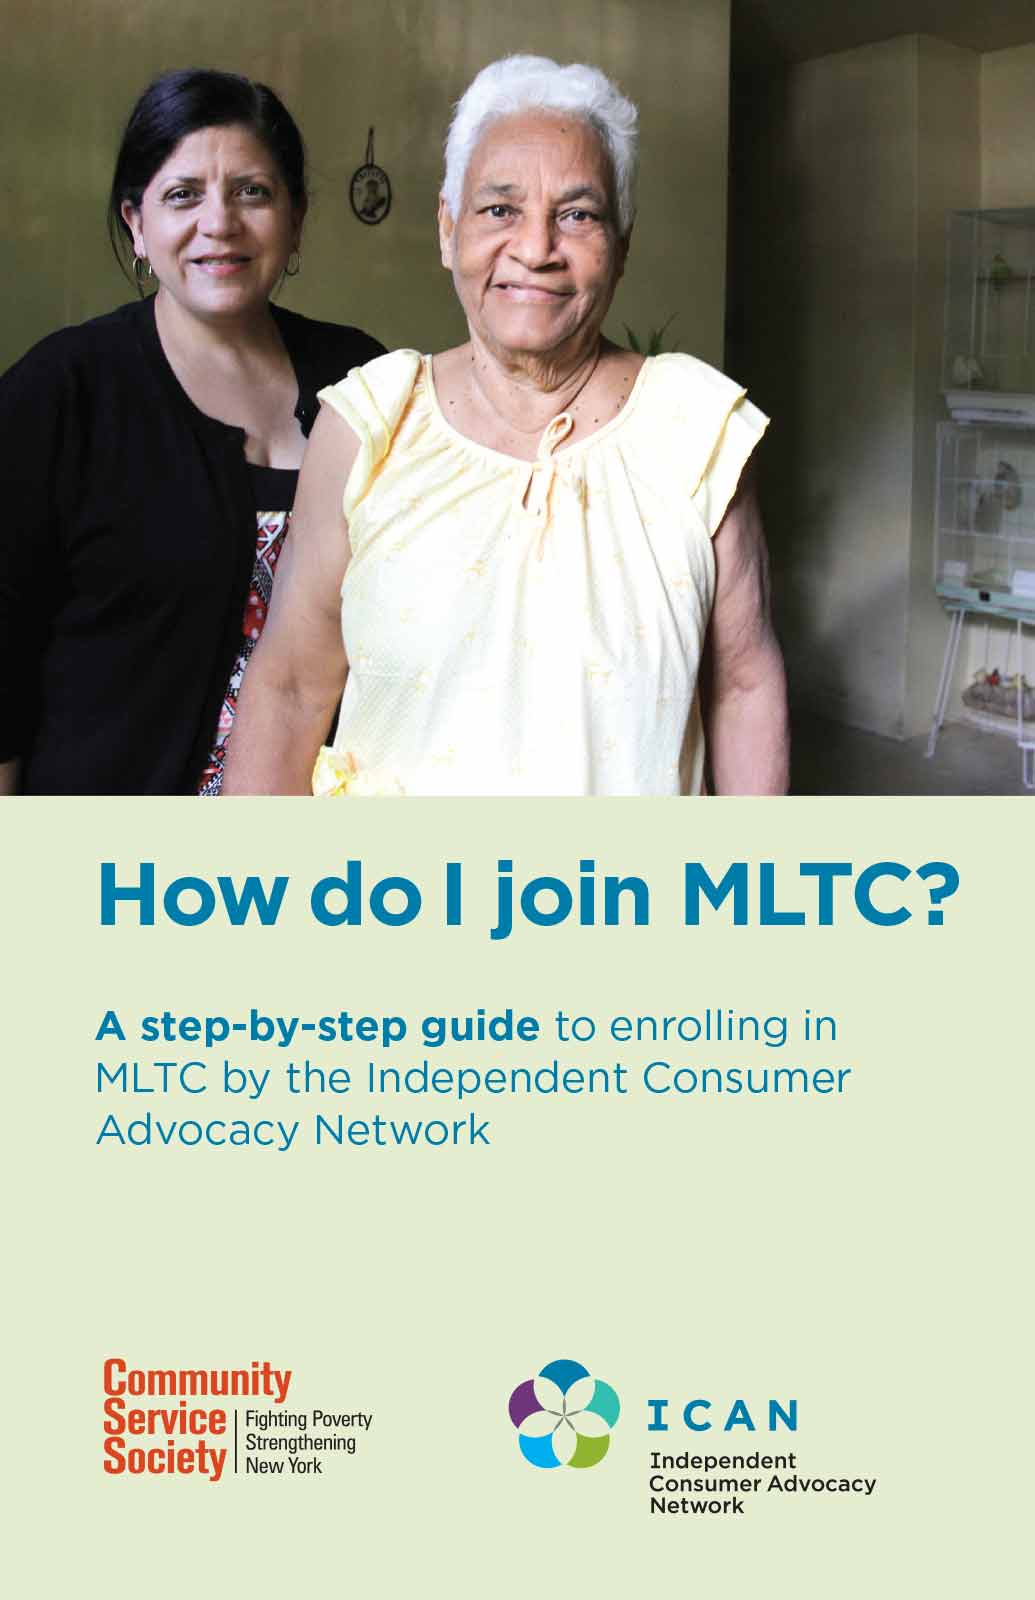 How do I join MLTC? brochure cover